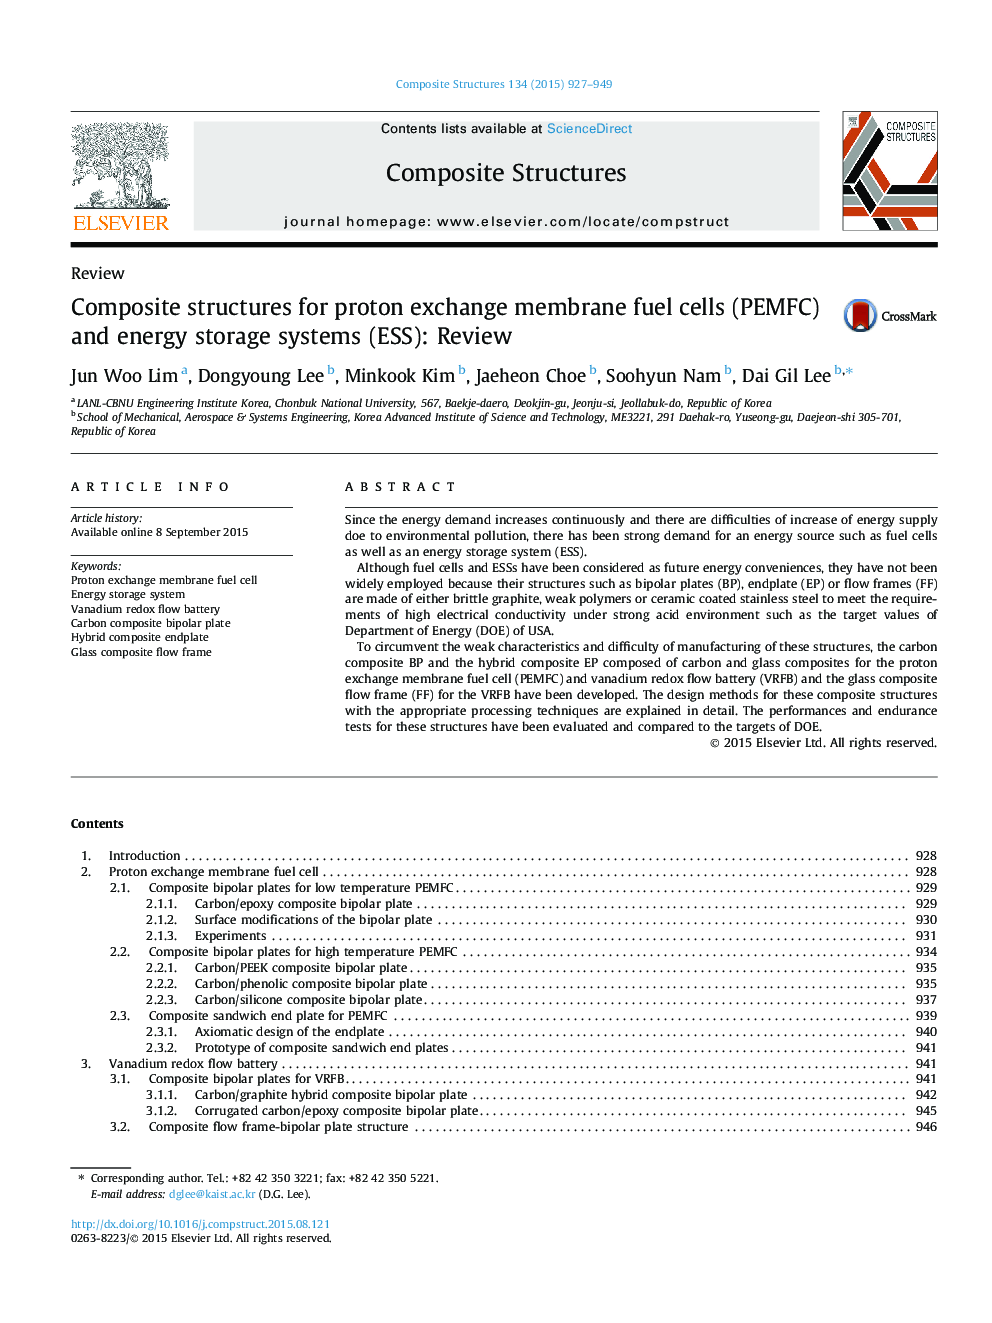 Composite structures for proton exchange membrane fuel cells (PEMFC) and energy storage systems (ESS): Review